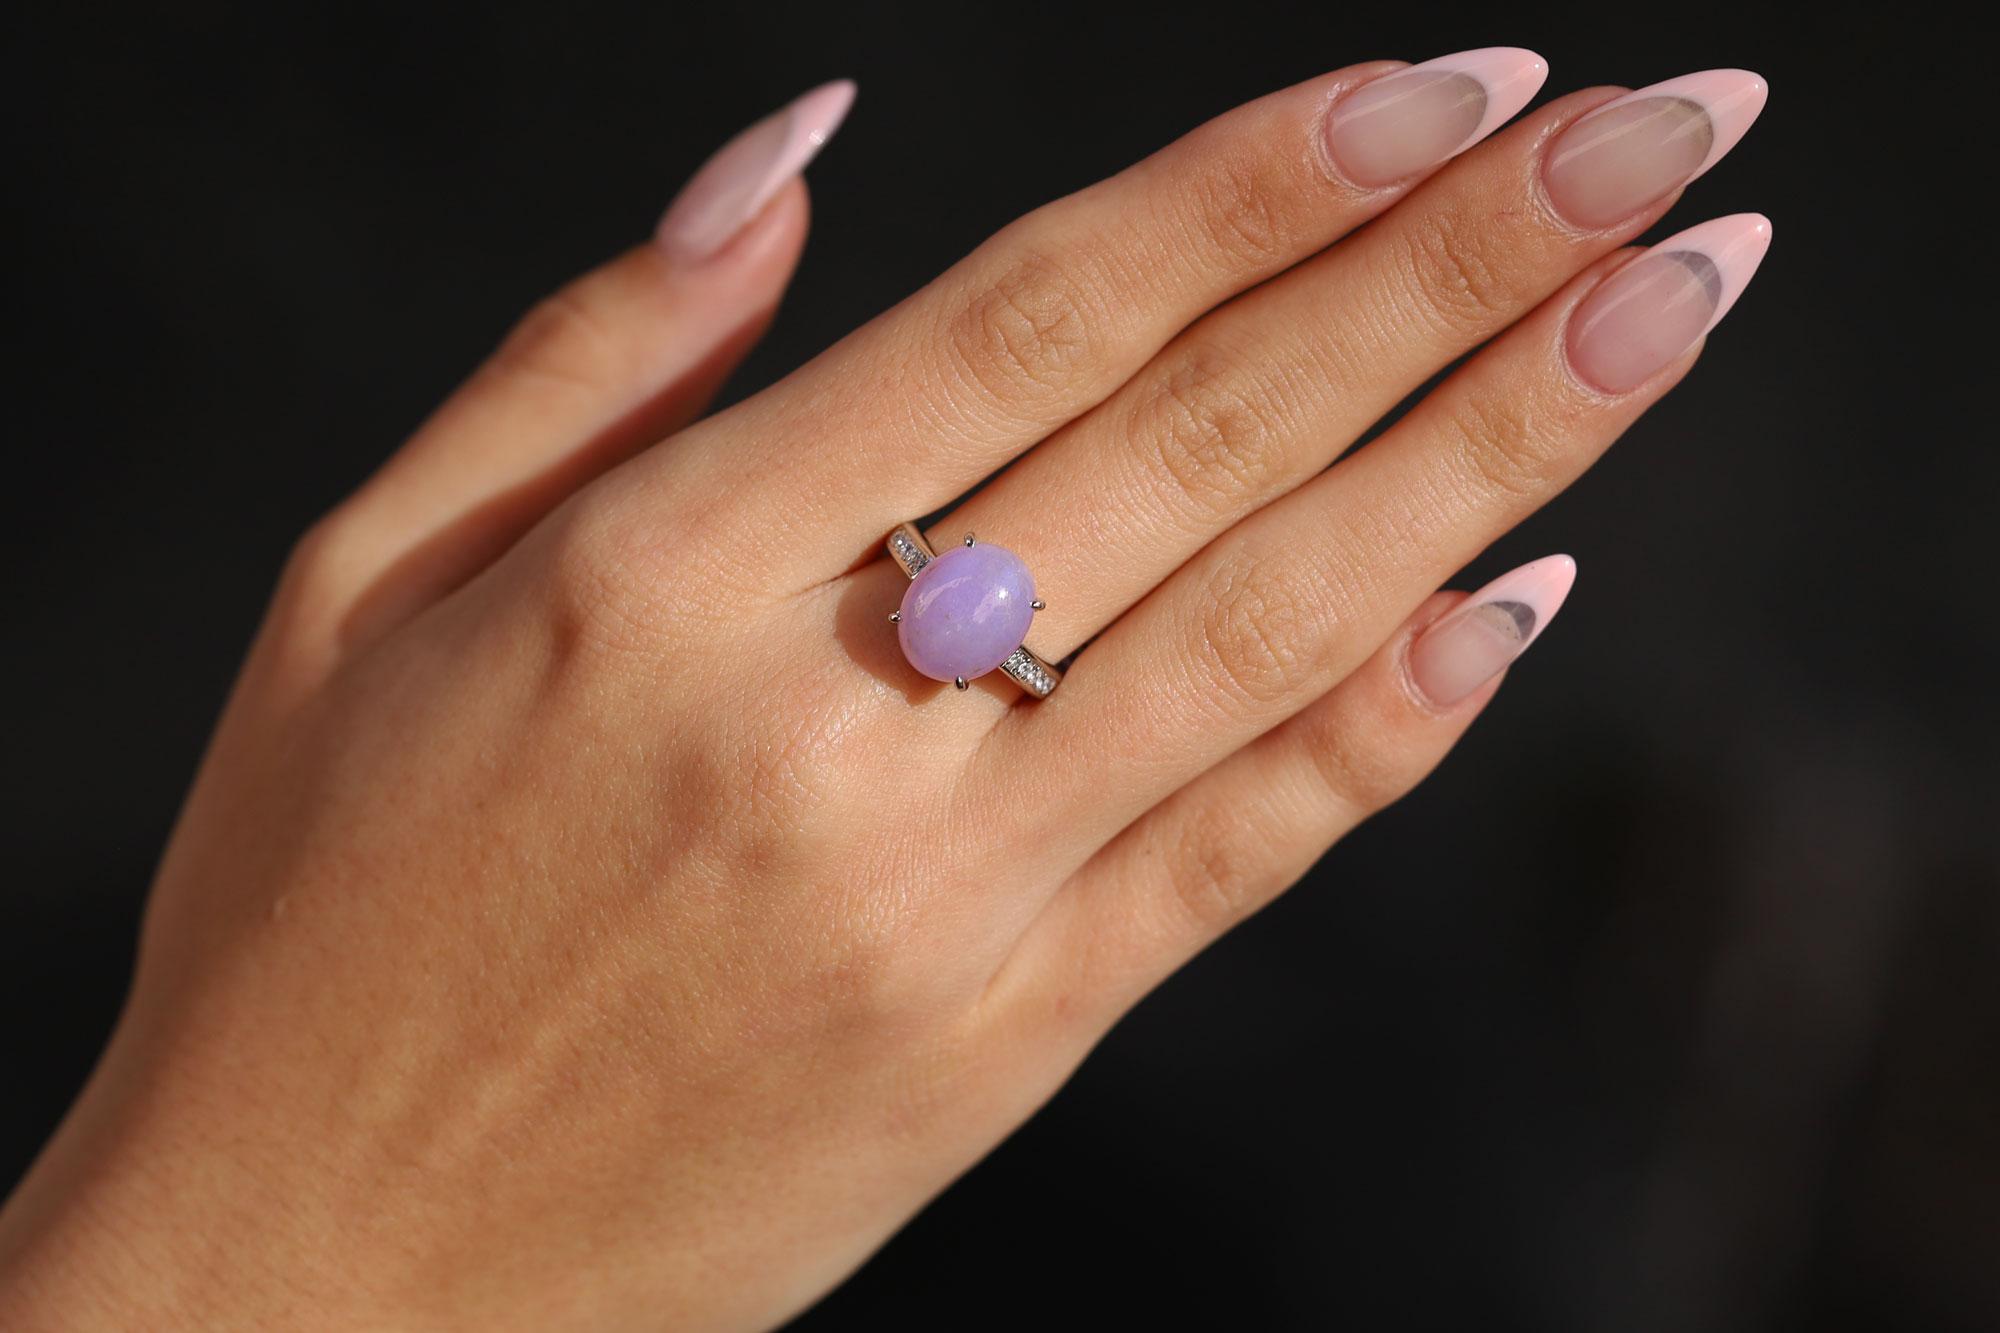 Bask in the beauty of this exceptional estate cocktail ring. The vintage stunner centers on a lesser seen lavender color jade, all natural and weighing 8.14 carats. 10 natural diamonds are expertly set in the platinum band, adding a loving touch of